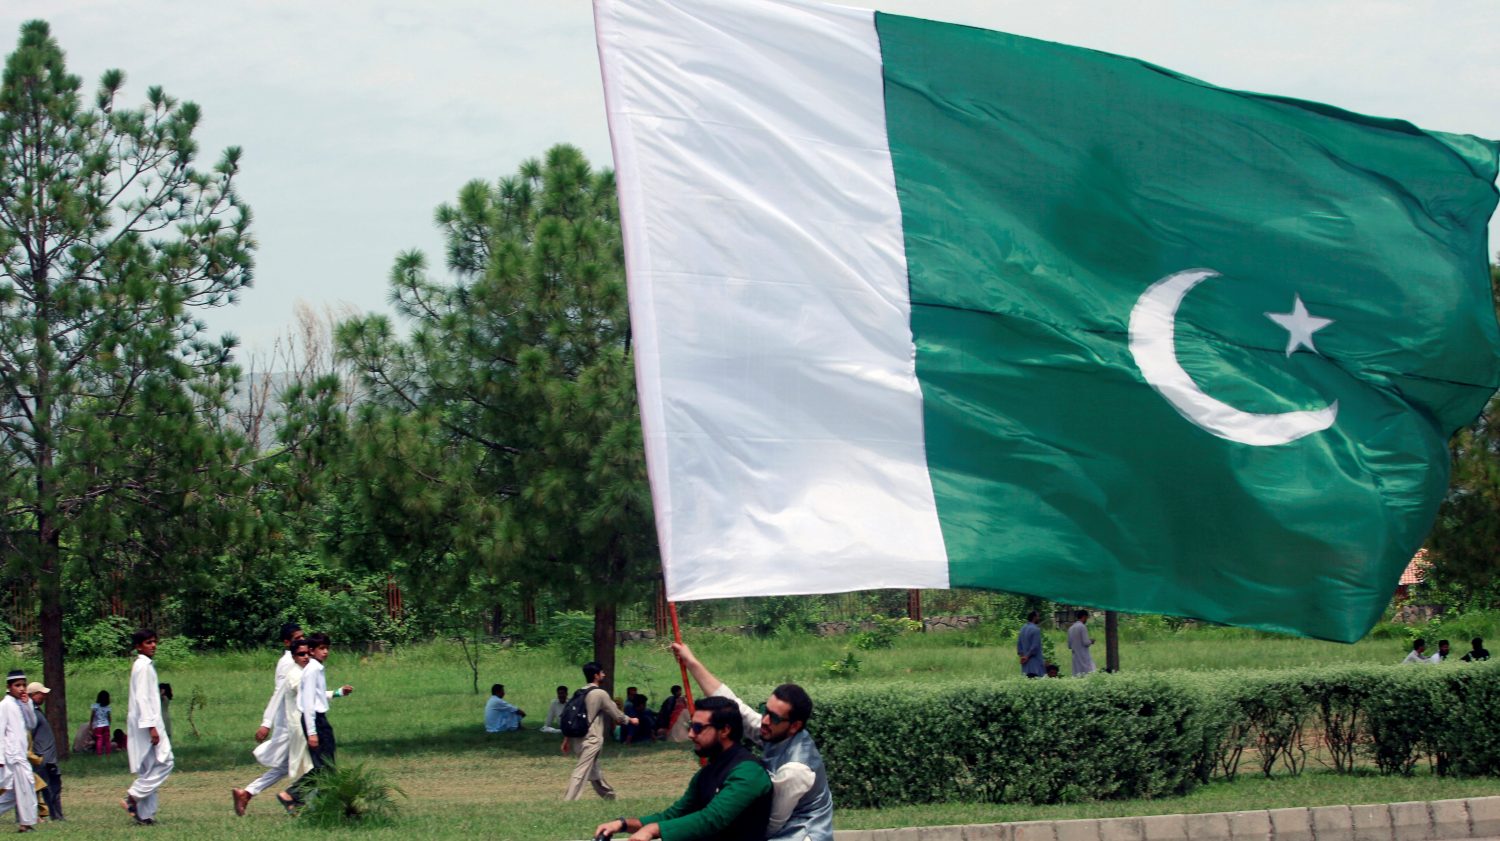 A man on the motor bike holds a national flag as he watches an air show to celebrate the 70th Independence Day in Islamabad, Pakistan August 14, 2017. REUTERS/Faisal Mahmood - RC1E2B34B240